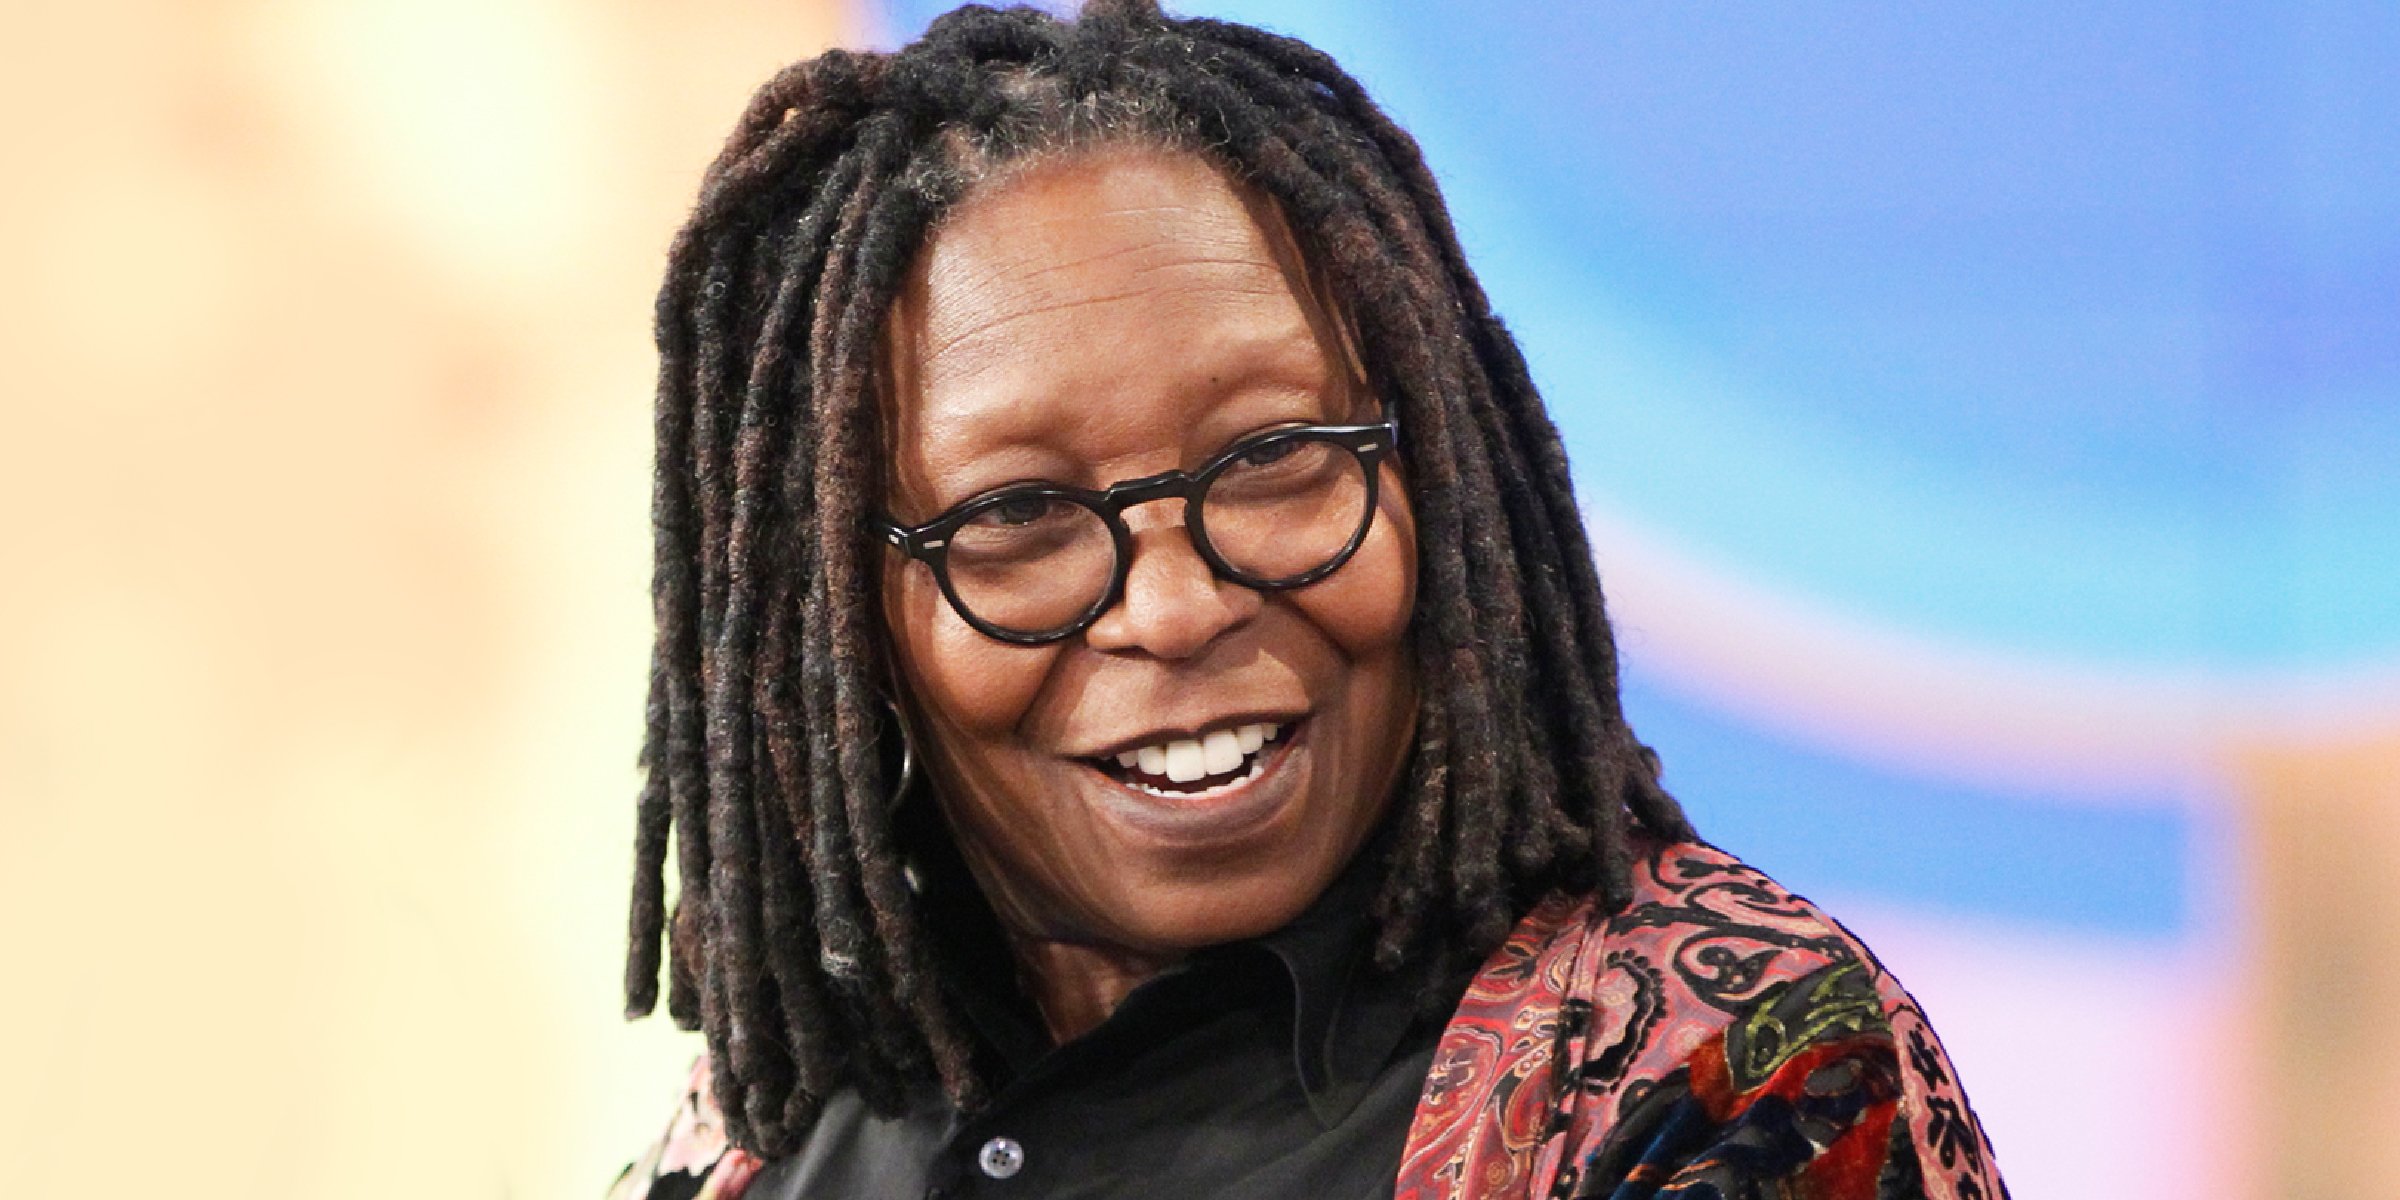 Whoopi Goldberg ┃Source: Getty Images